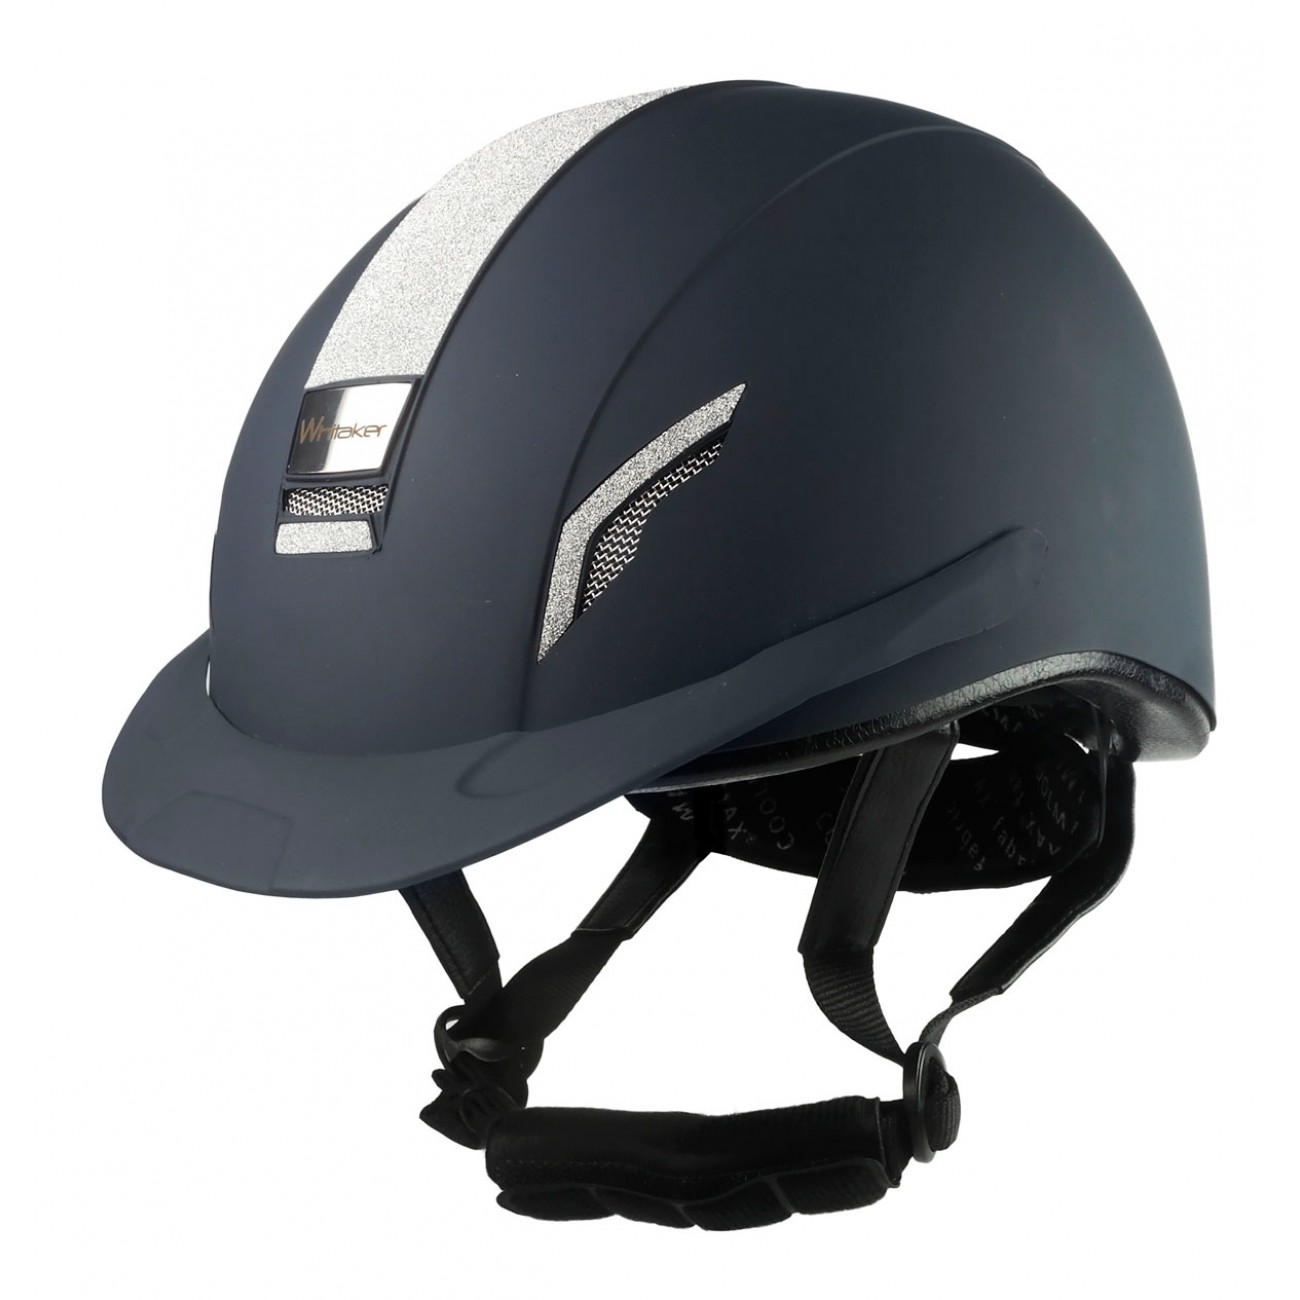 John Whitaker Helmets new version competition approved 